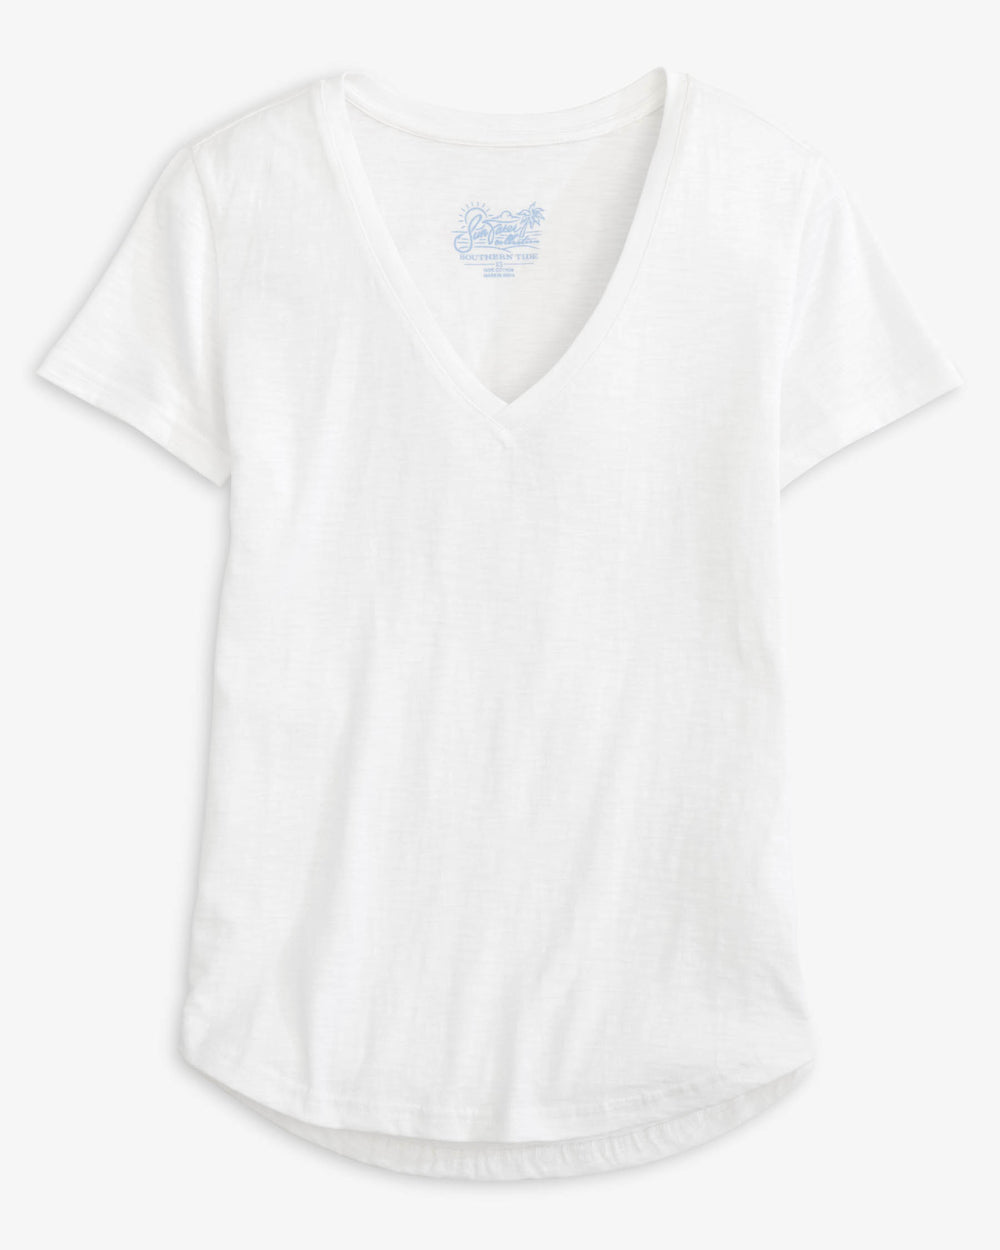 The front view of the Audrey Sun Farer Short Sleeve T-shirt by Southern Tide - Classic White